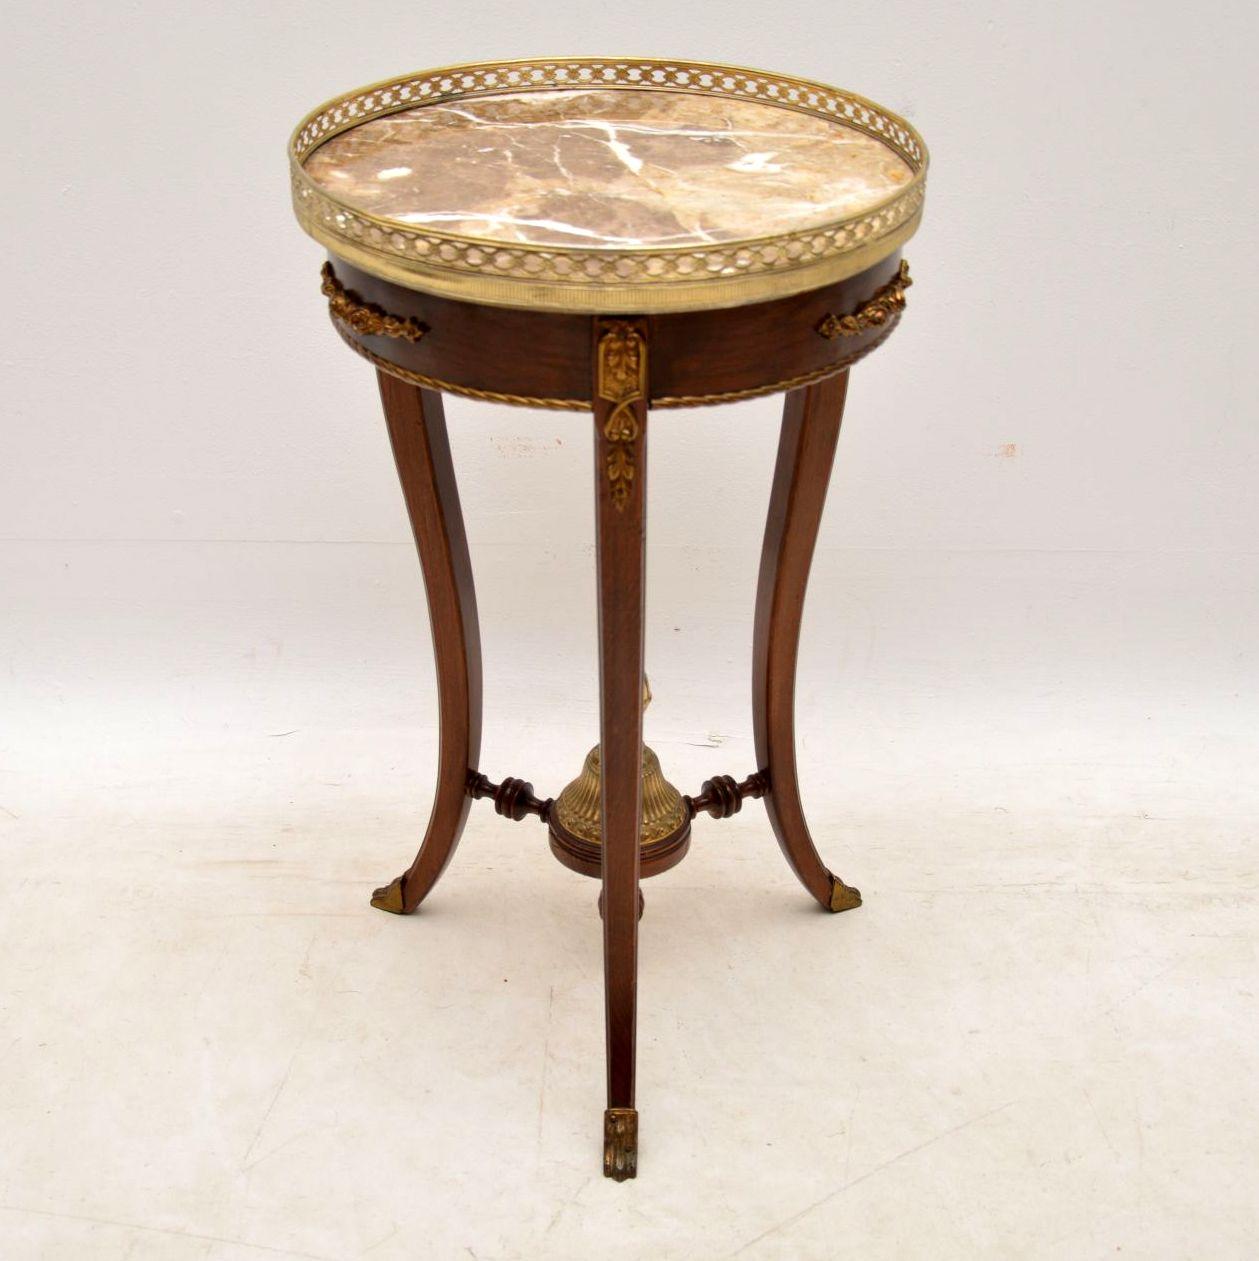 Antique French style marble-top occasional table with gilt metal mounts and a pieced gilt gallery around the marble top. There are three shaped legs with gilt metal feet. They are joined by three turned stretchers with a large gilt finial in the